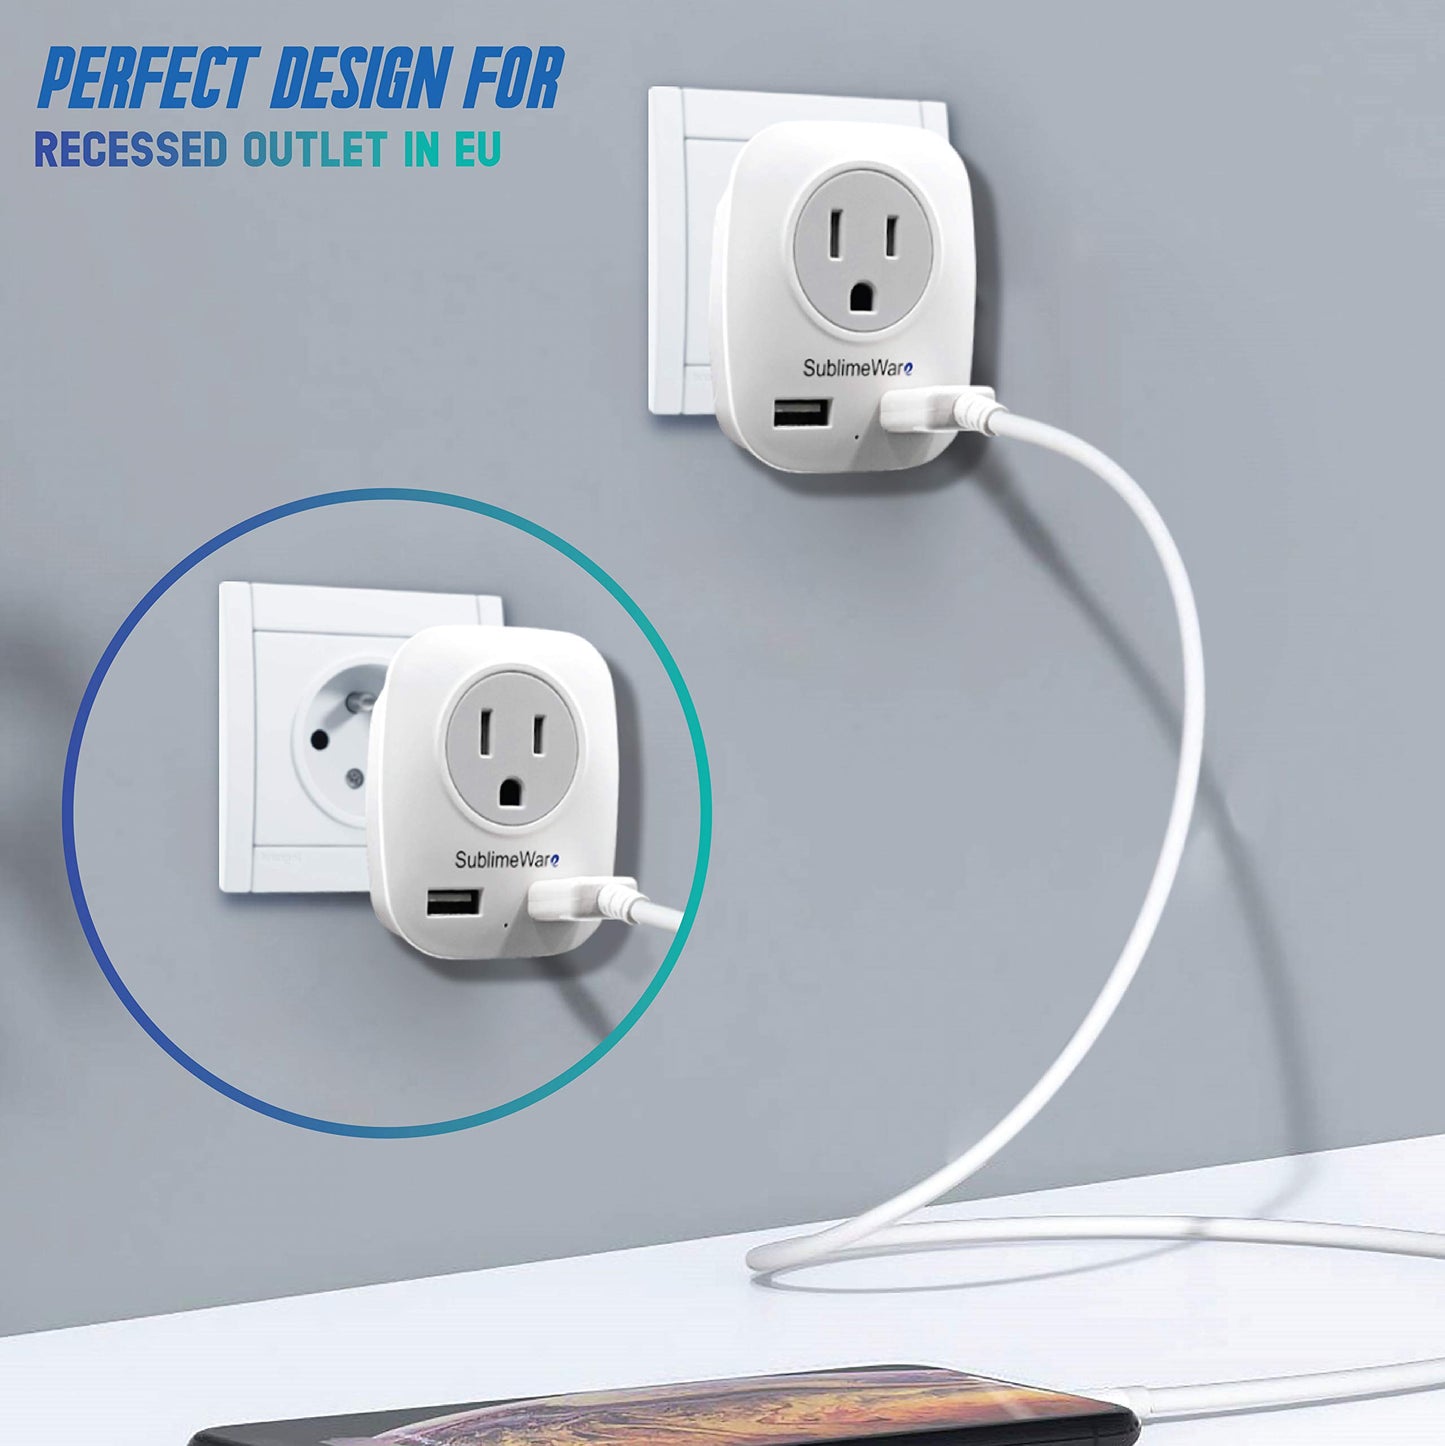 European Power Adapter w/ 2 USB Ports & 2 AC Outlets - USA to EU 1 Pack